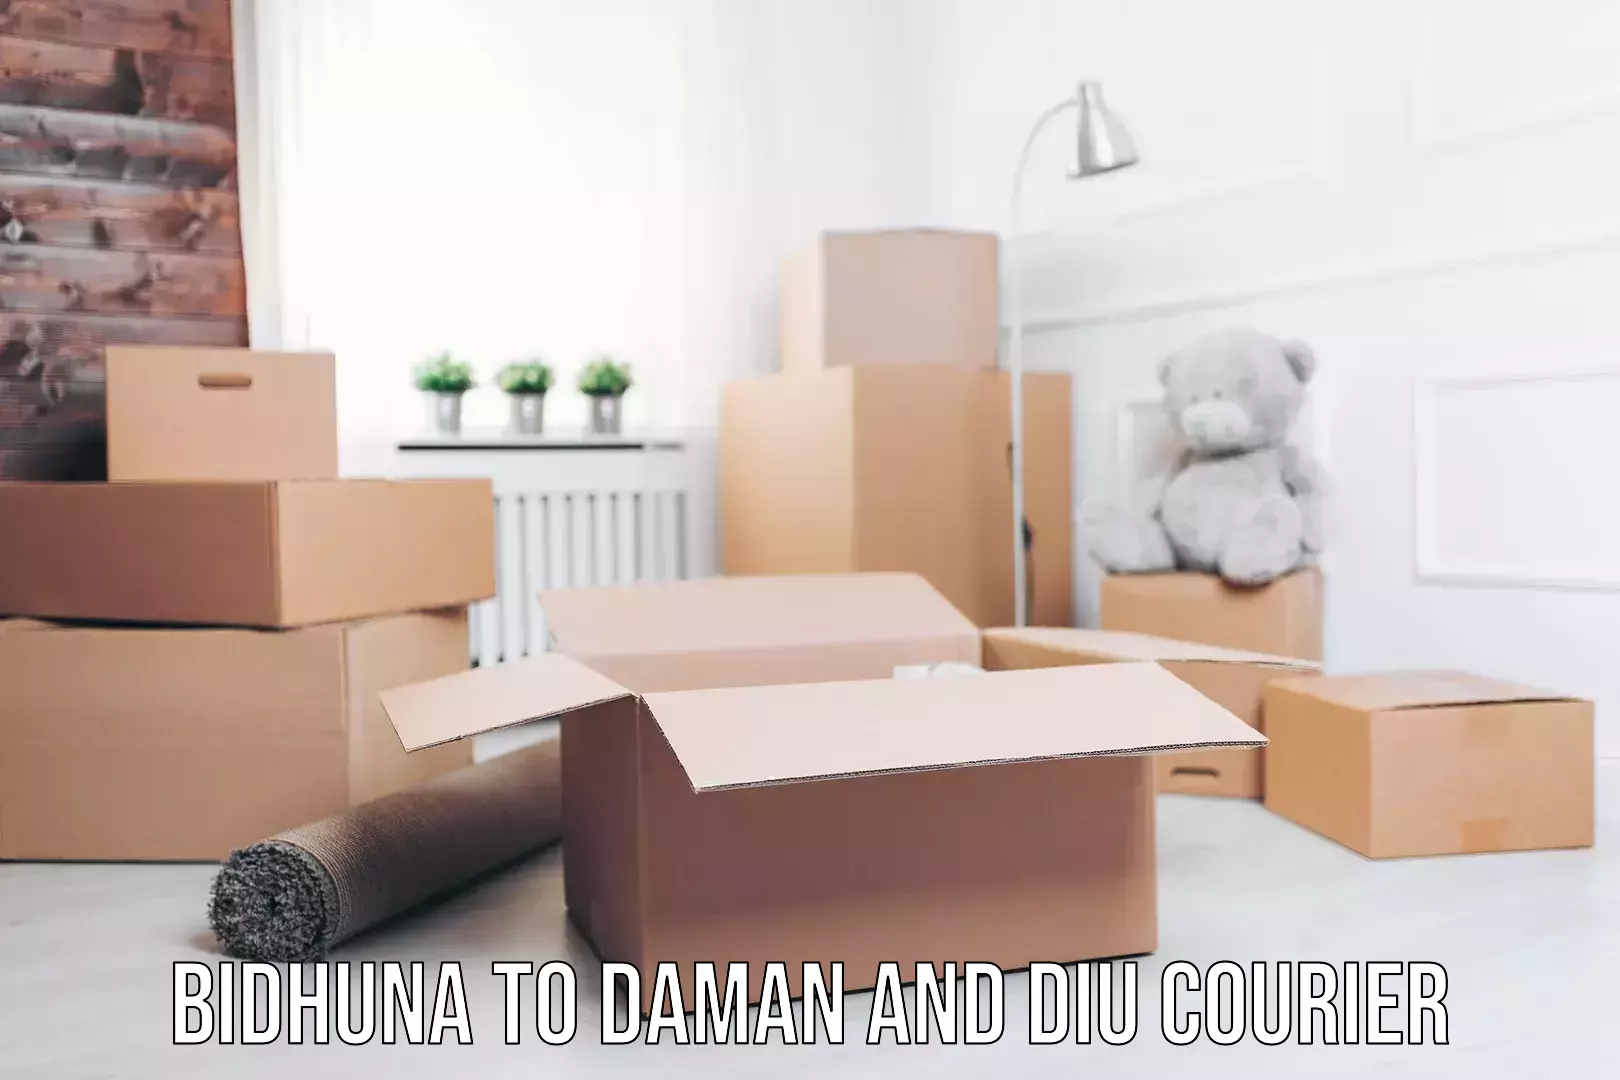 Residential courier service Bidhuna to Daman and Diu